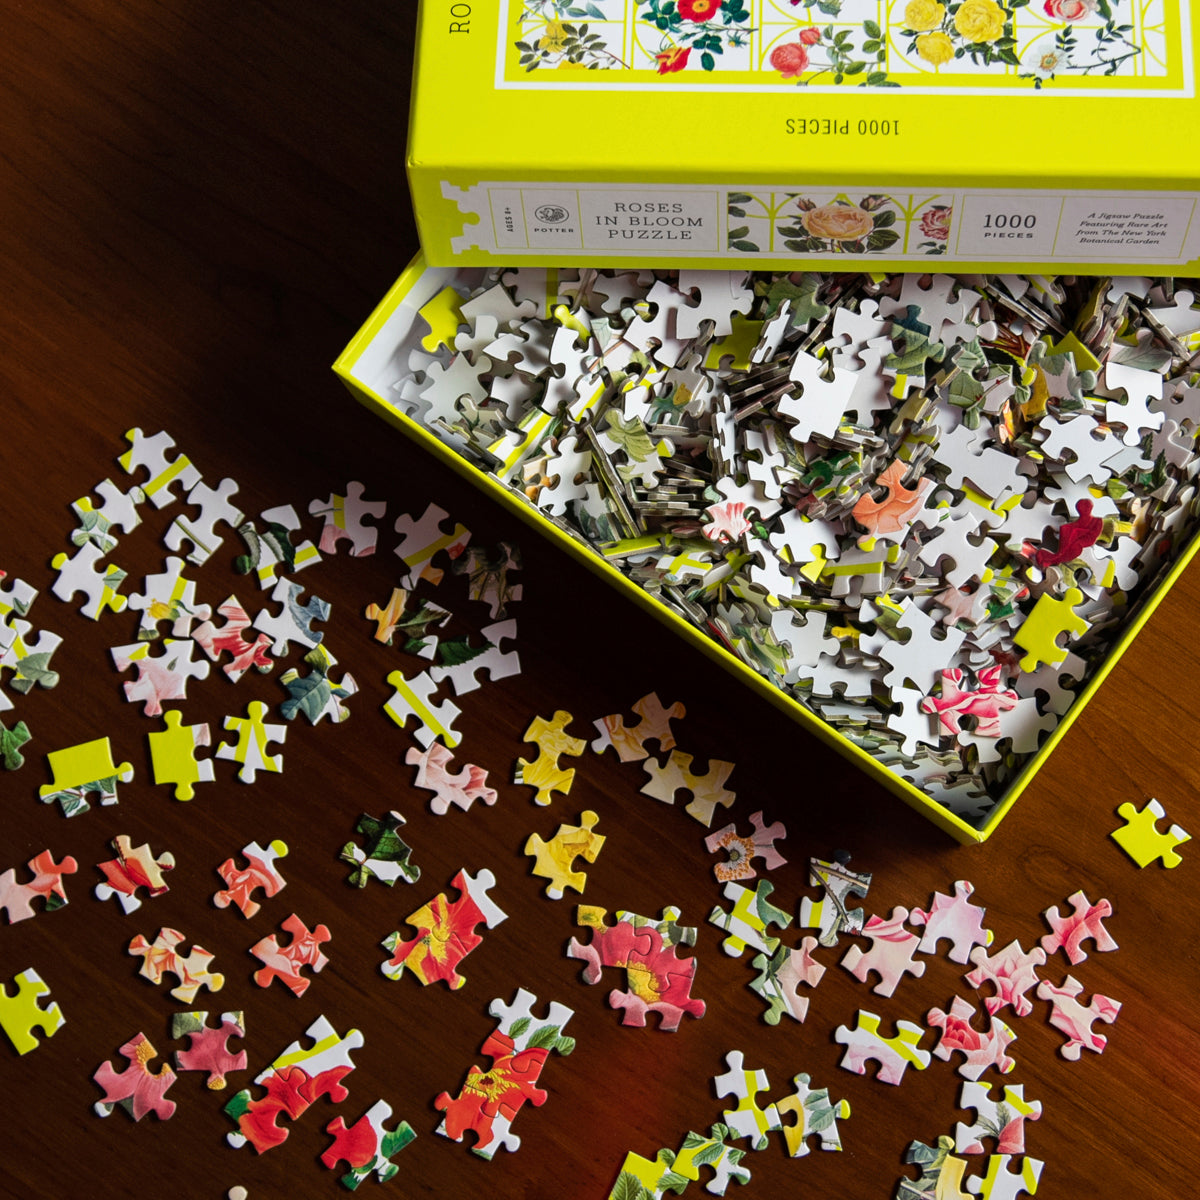 Roses in Bloom Puzzle